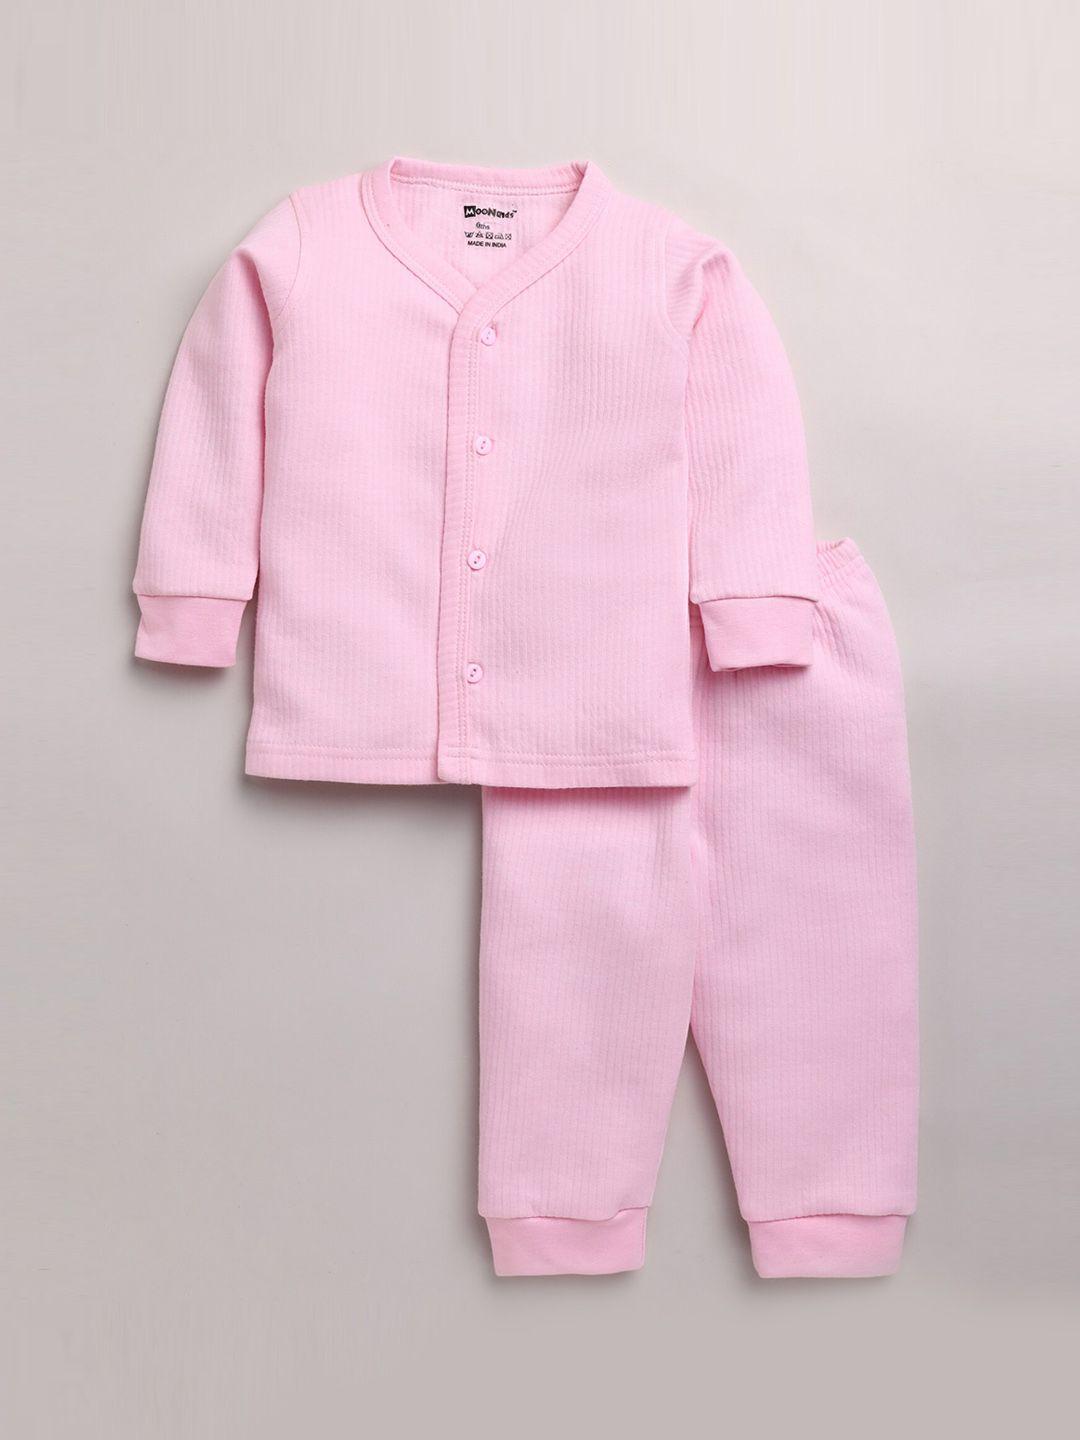 moonkids-boys-pink-solid-thermal-set